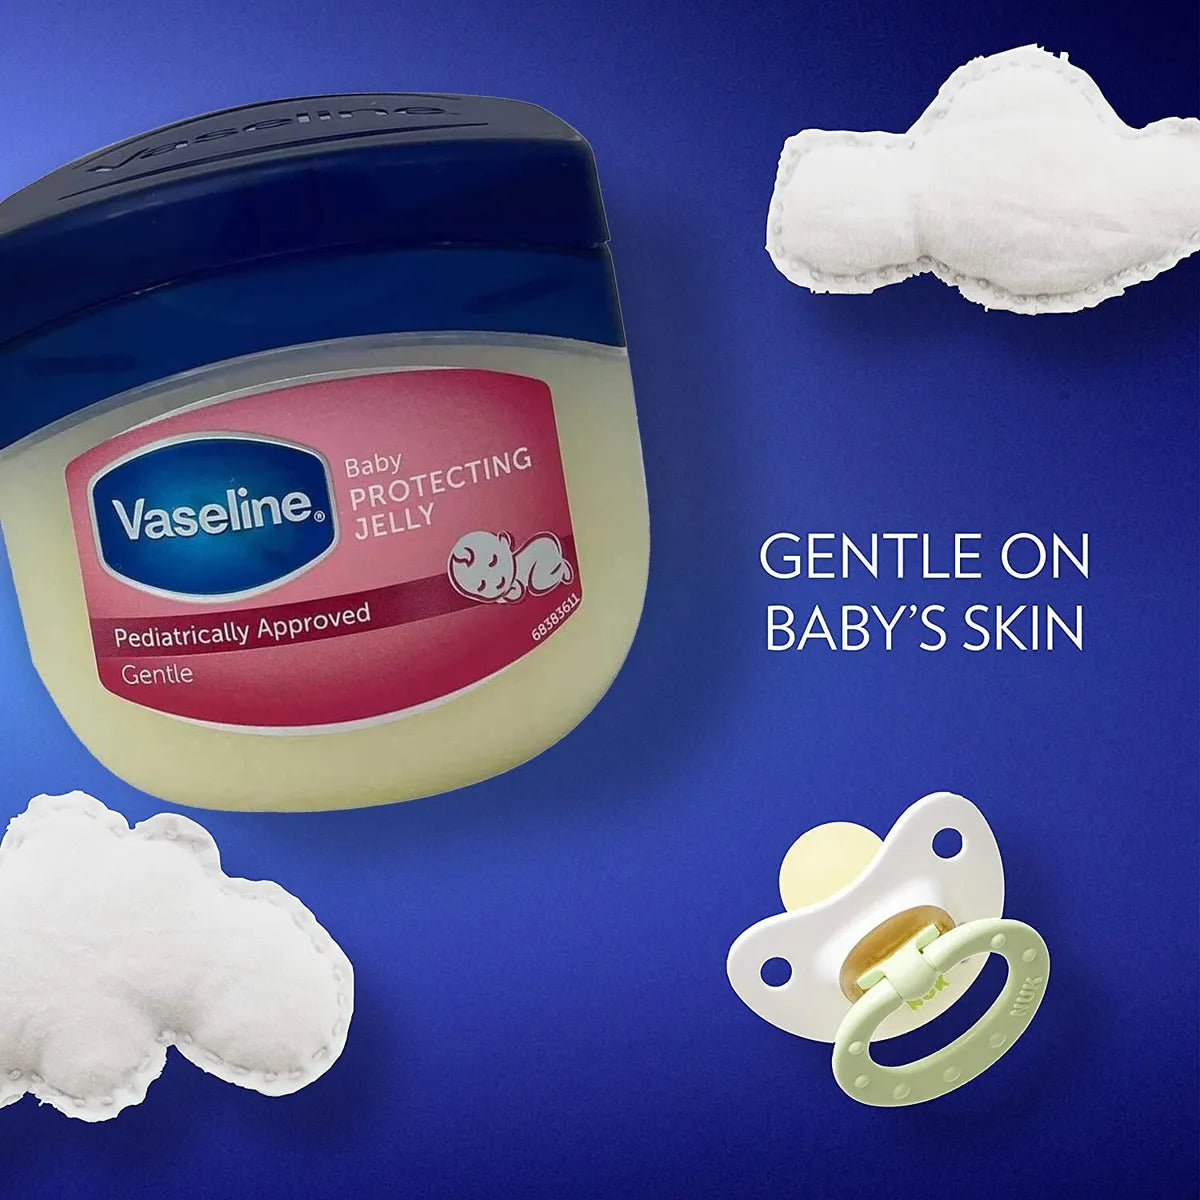 Vaseline - Baby Protecting Petroleum Jelly (Pediatrically Approved)